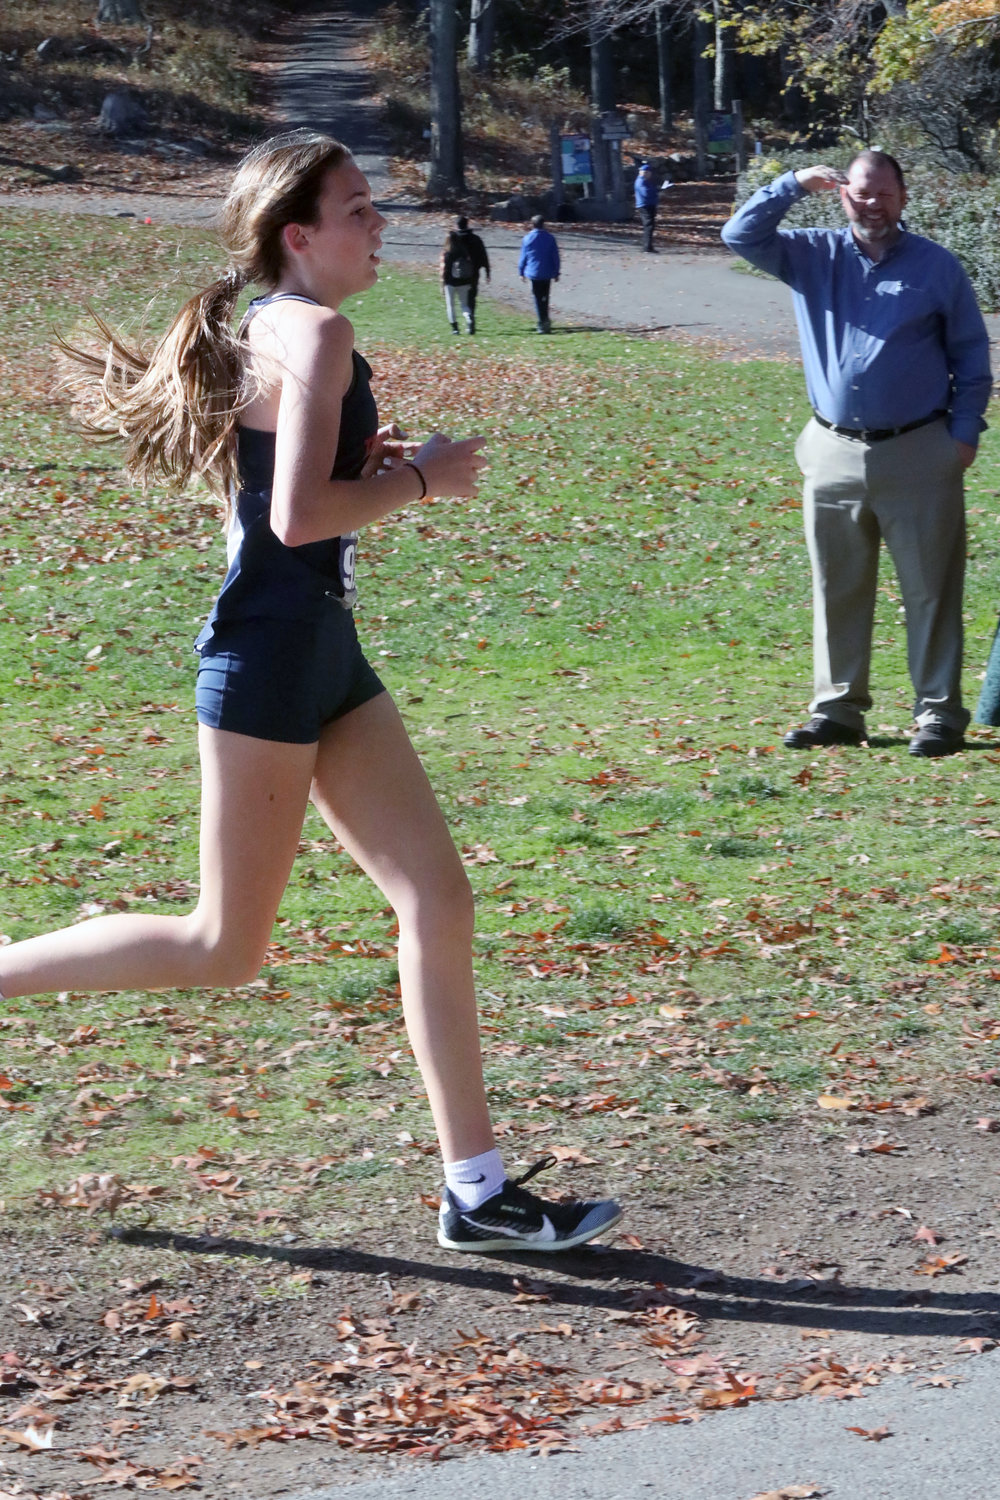 T-V’s Brynn Poley finished ninth overall in the race which was won by the Mount Academy team. Brynn was among the top five runners besides the winning team to make it to states.